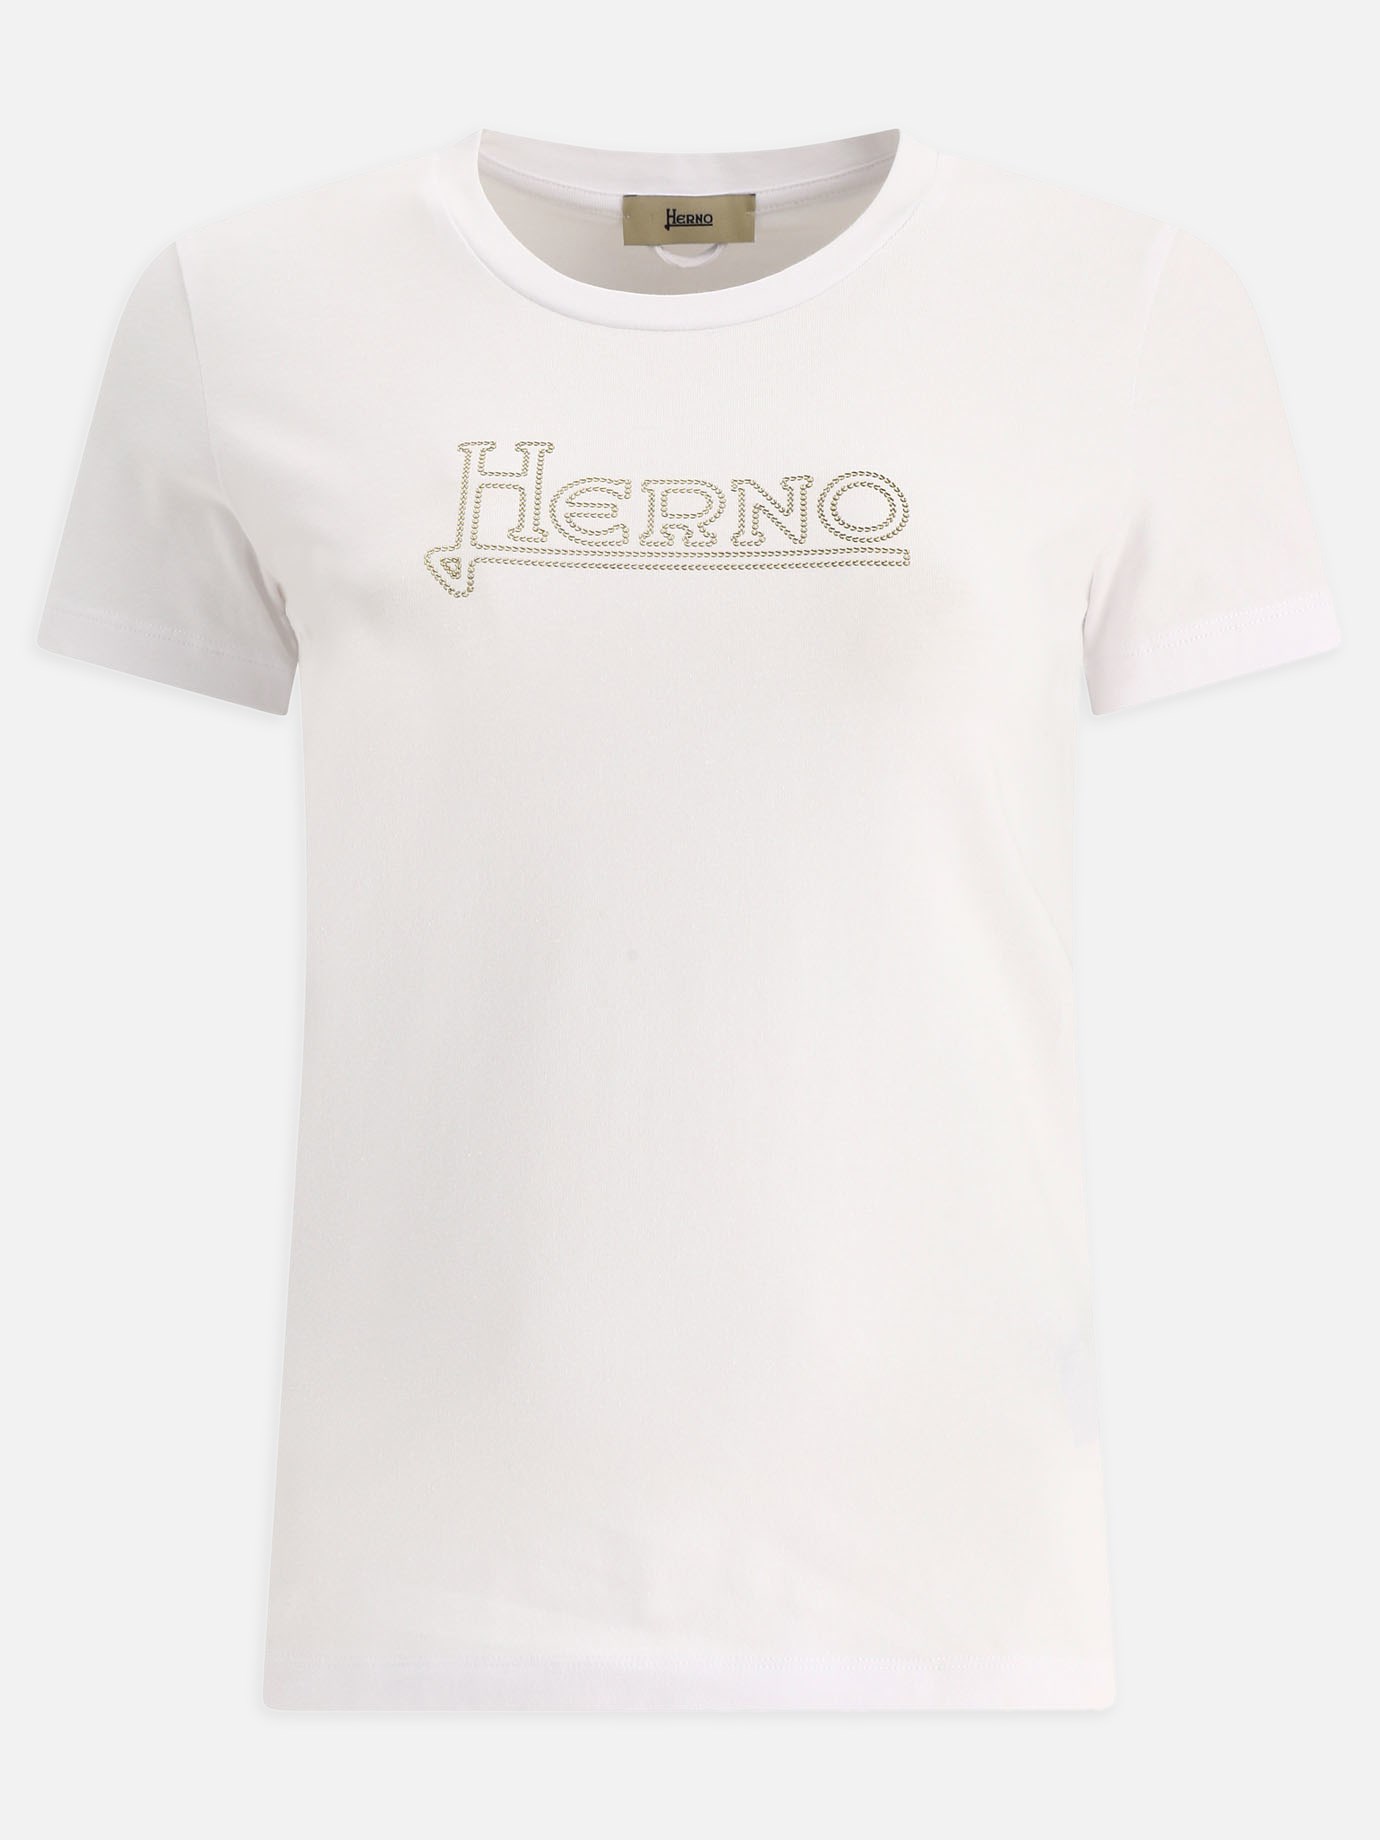  Stitches  t-shirt by Herno